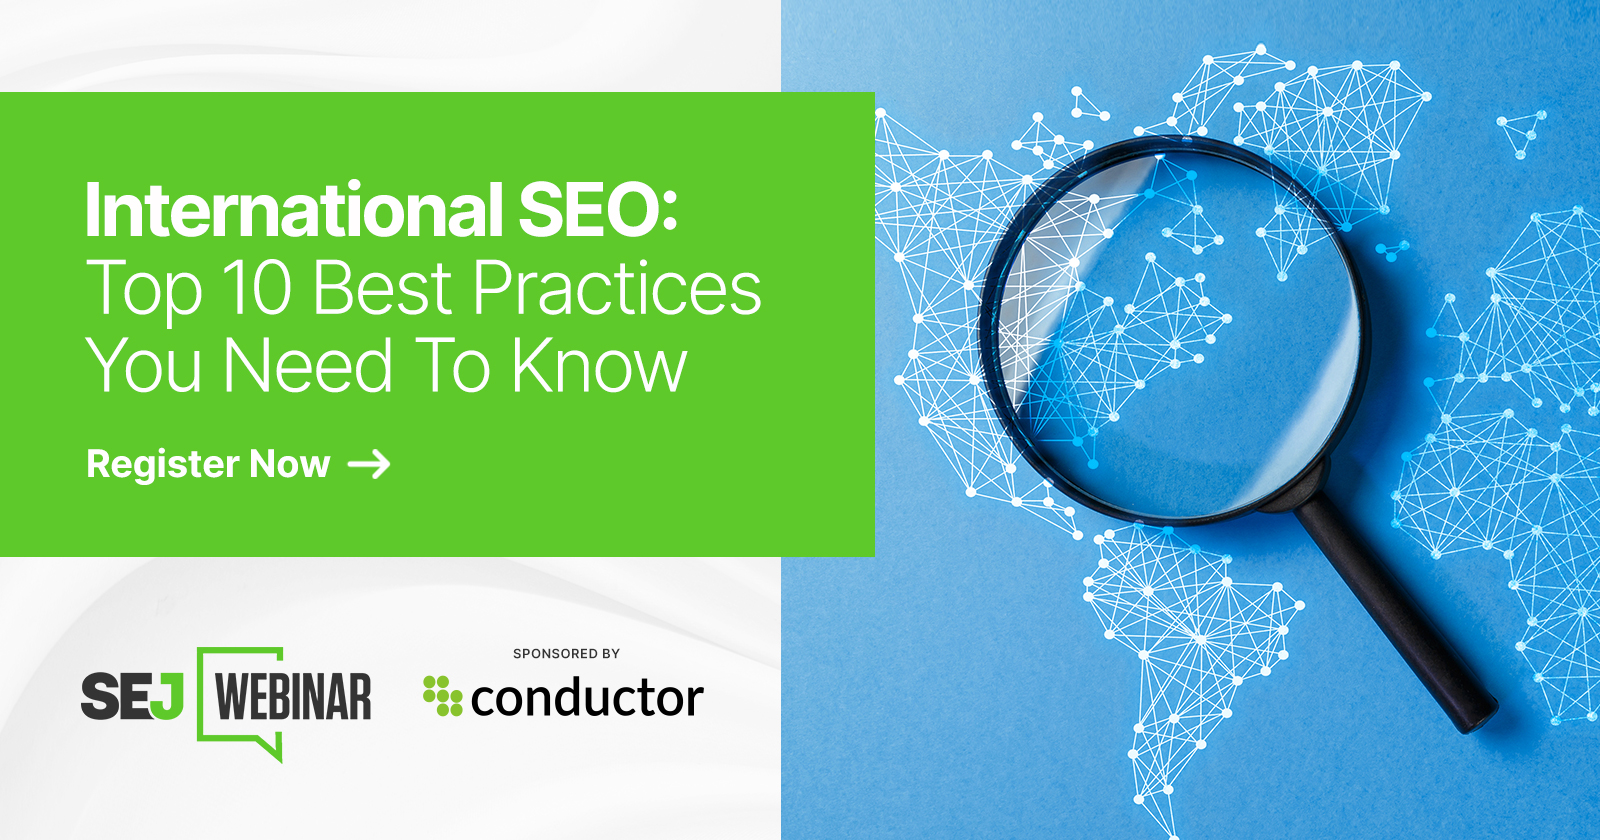 International SEO: Top 10 Best Practices You Need To Know [Webinar] via @sejournal, @hethr_campbell